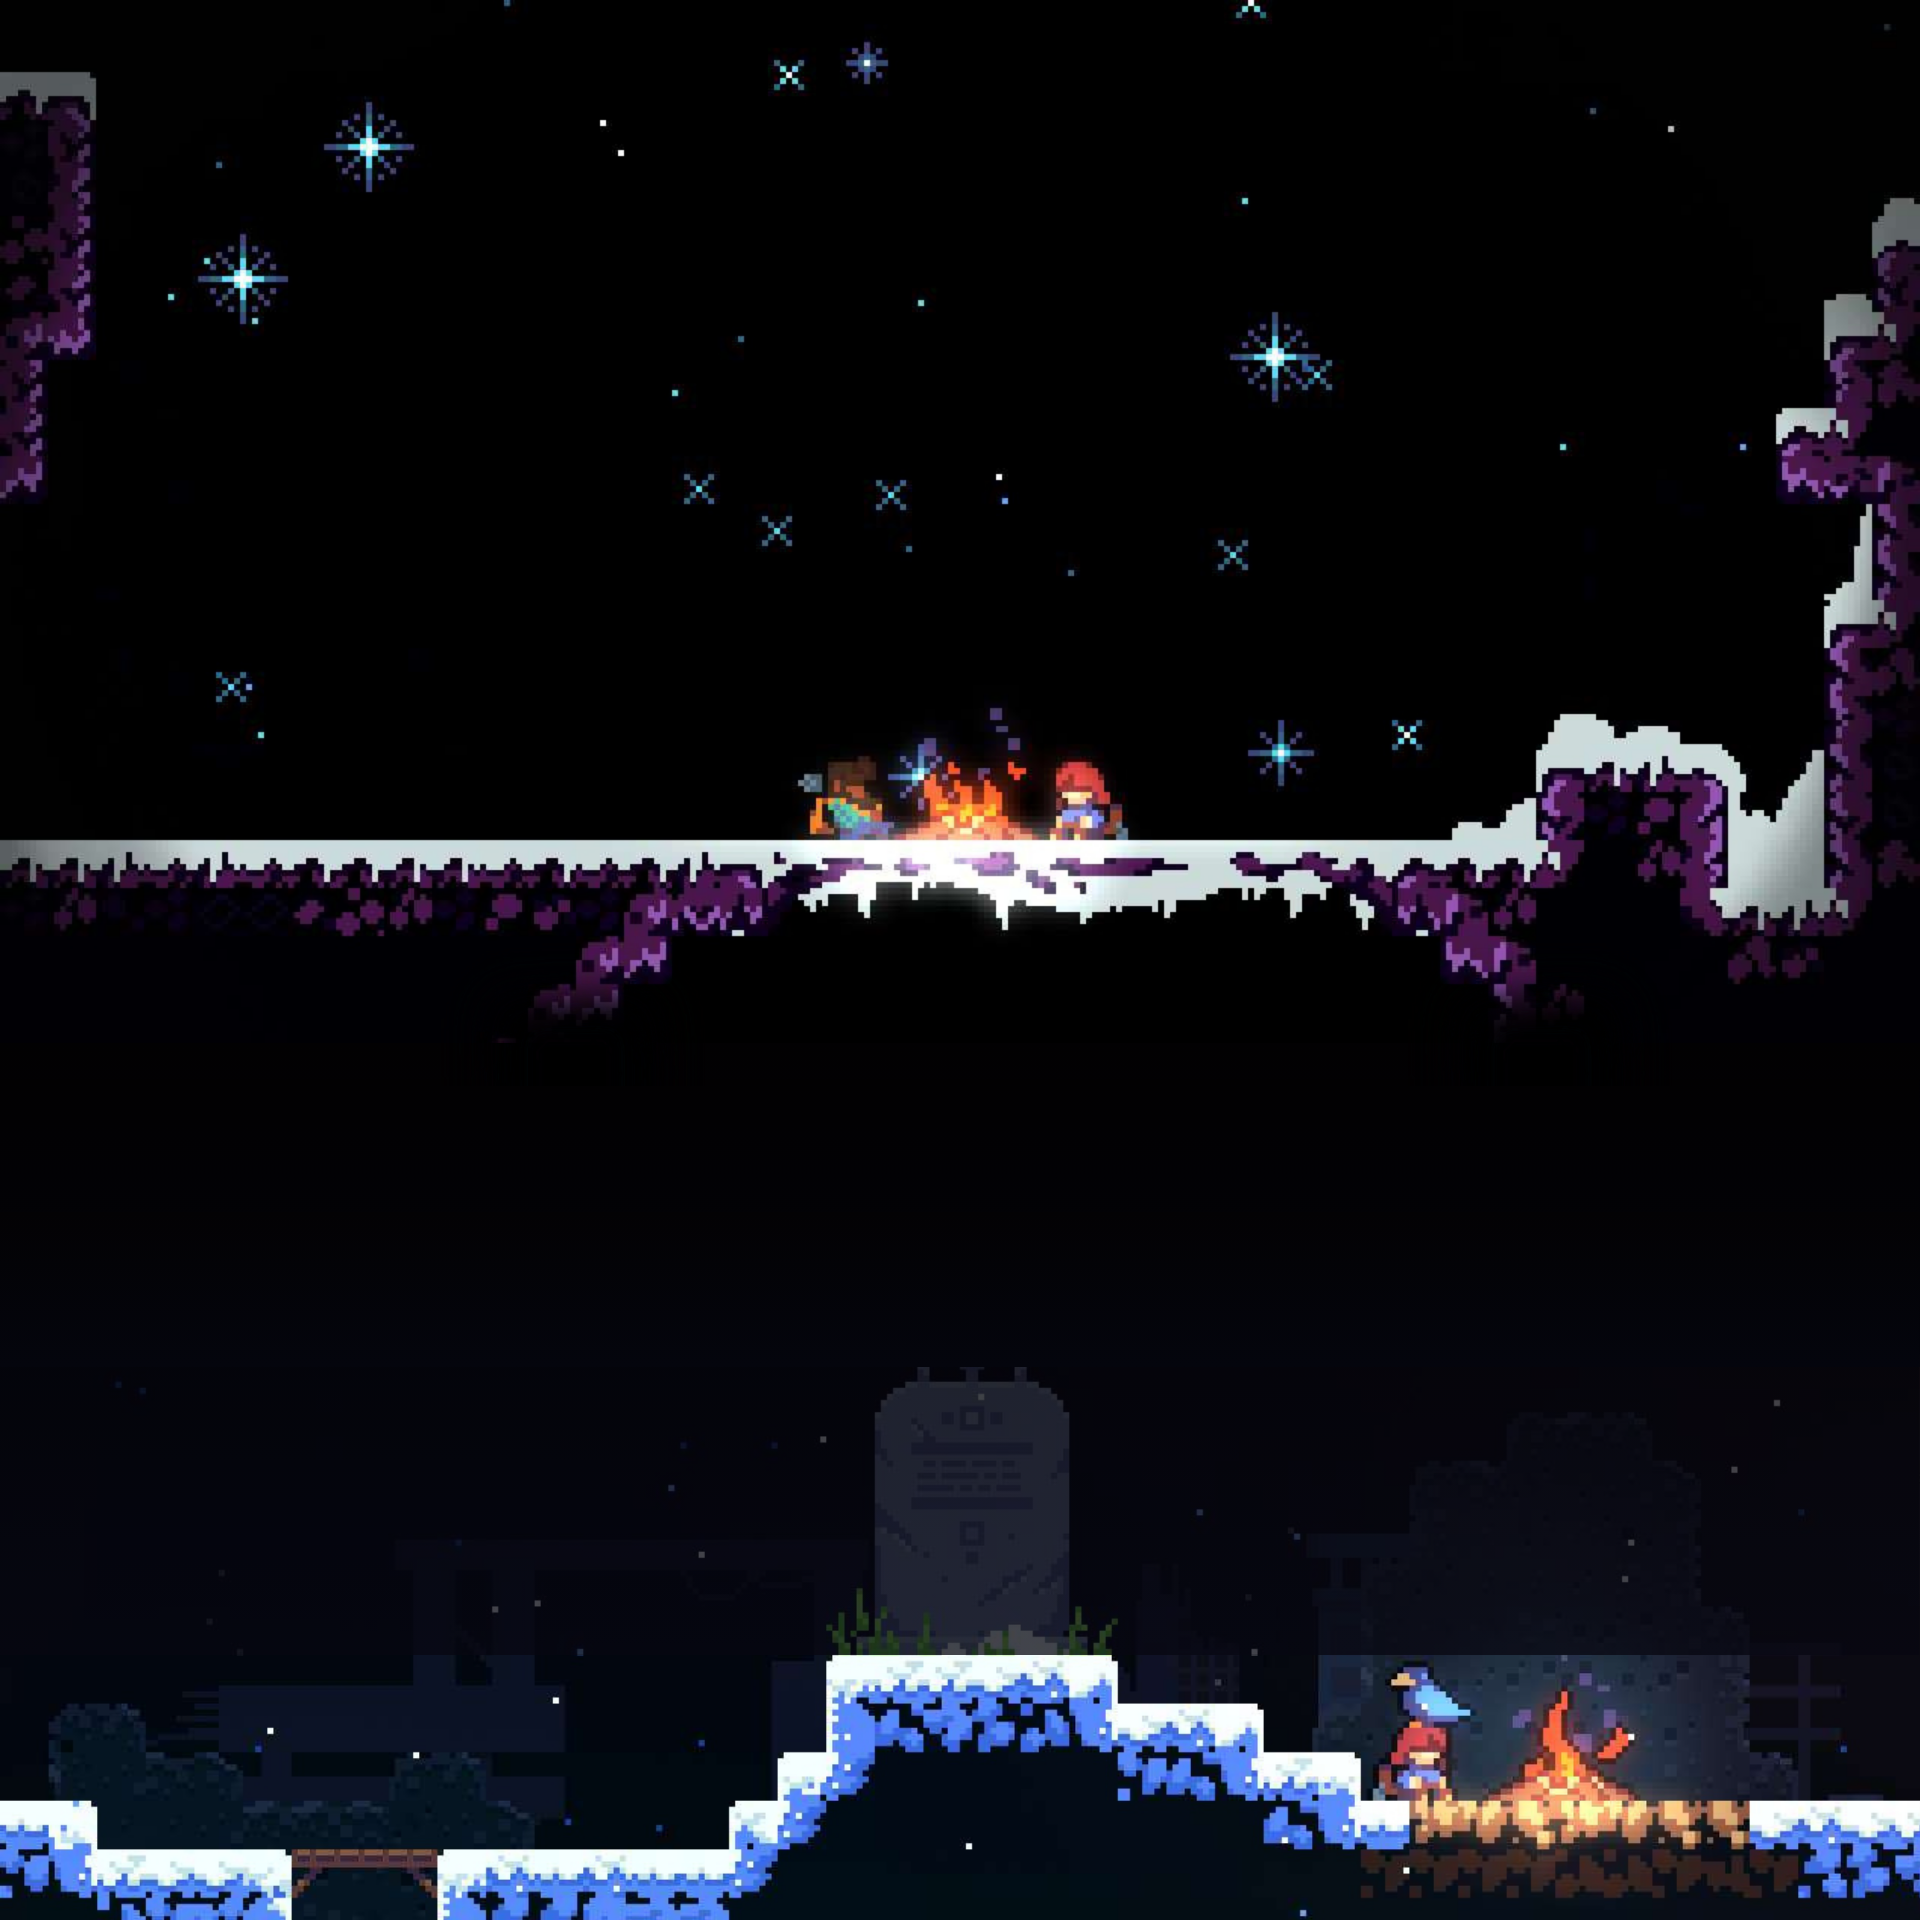 two screenshots of the game Celeste create a background image of a starry sky.